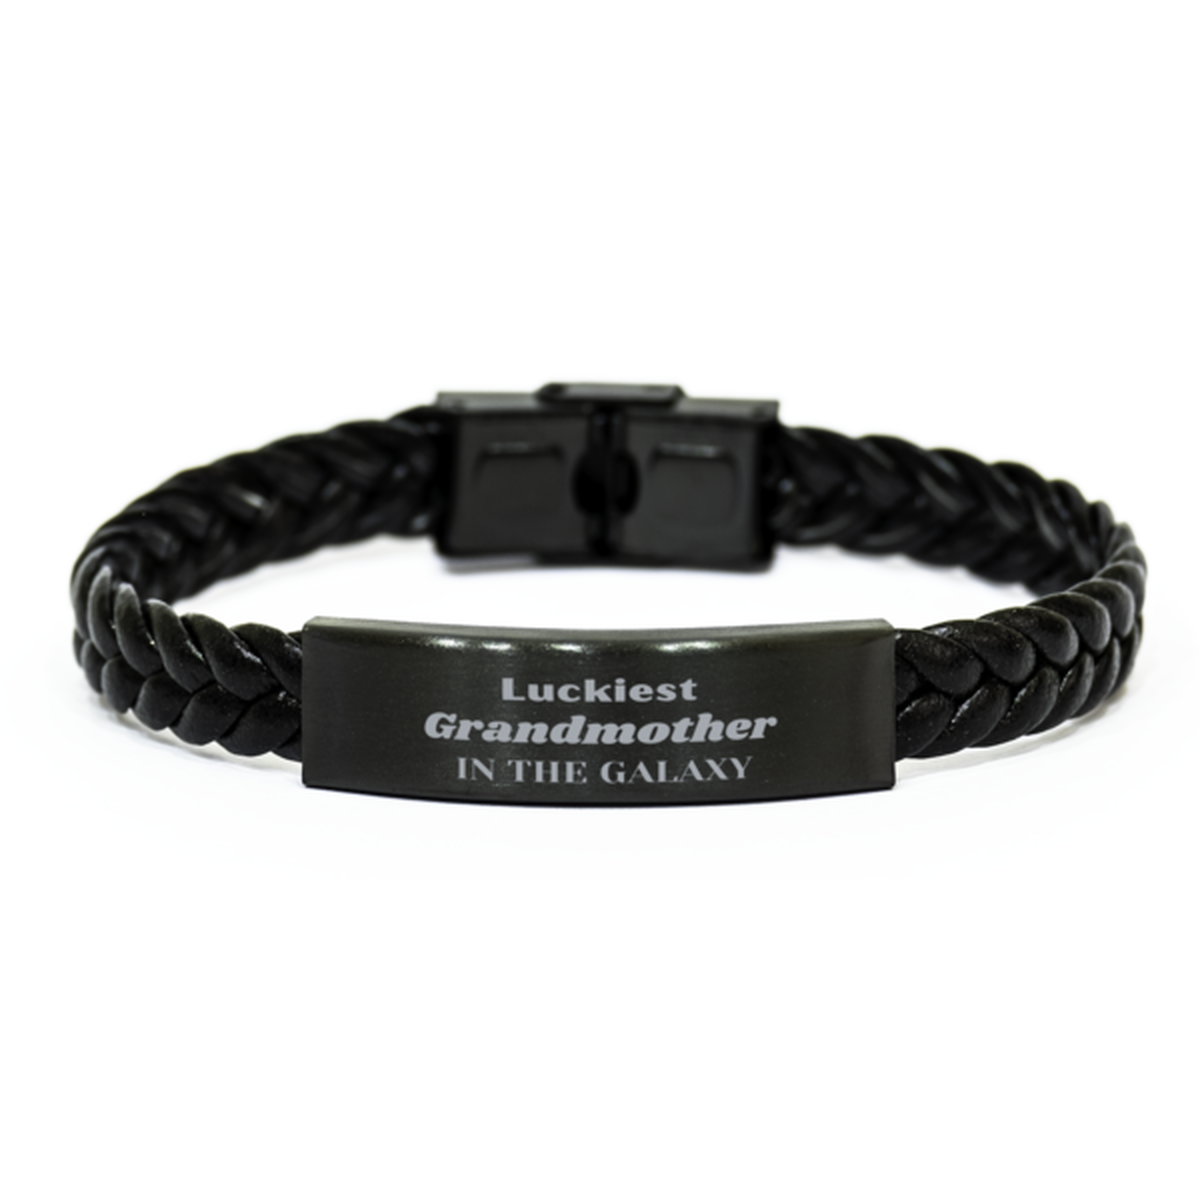 Luckiest Grandmother in the Galaxy, To My Grandmother Engraved Gifts, Christmas Grandmother Braided Leather Bracelet Gifts, X-mas Birthday Unique Gifts For Grandmother Men Women